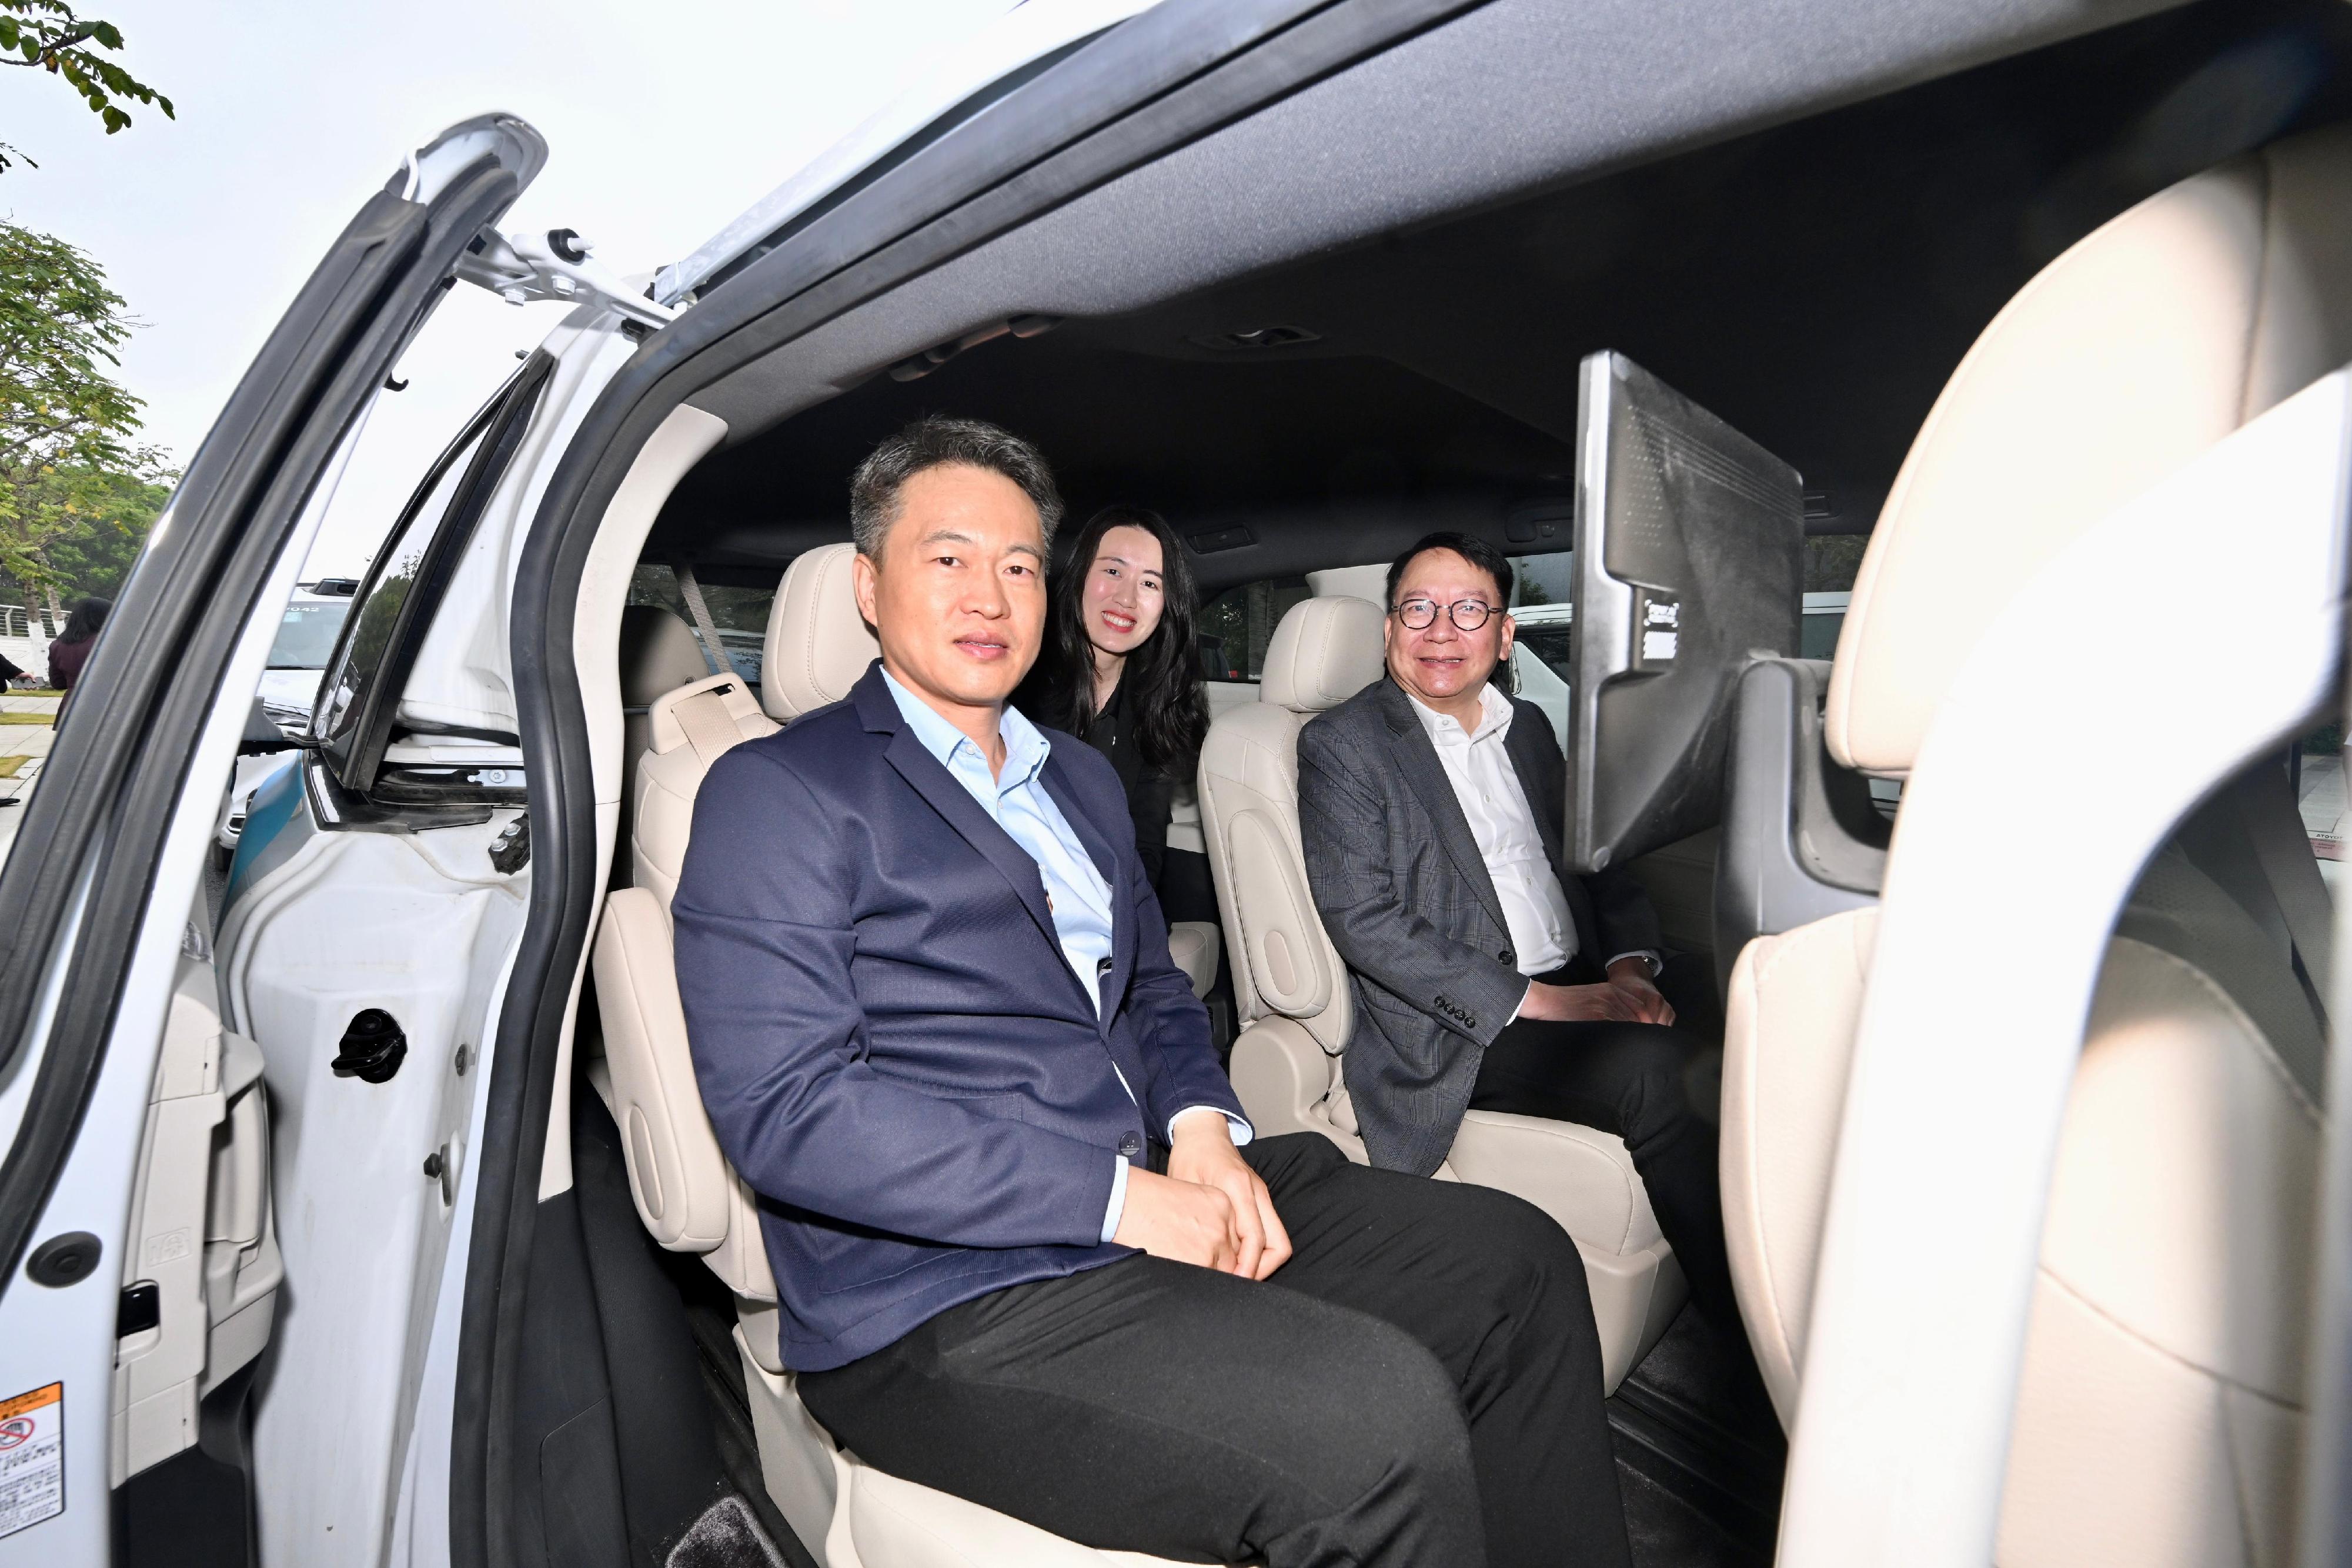 The Chief Secretary for Administration, Mr Chan Kwok-ki, continued his visit to Mainland cities of the Guangdong-Hong Kong-Macao Greater Bay Area in Guangzhou and Huizhou today (January 9). Photo shows Mr Chan (right) accompanied by Vice President of Pony.ai Ms Mo Luyi (centre) taking a Robotaxi of the company in Nansha, Guangzhou.